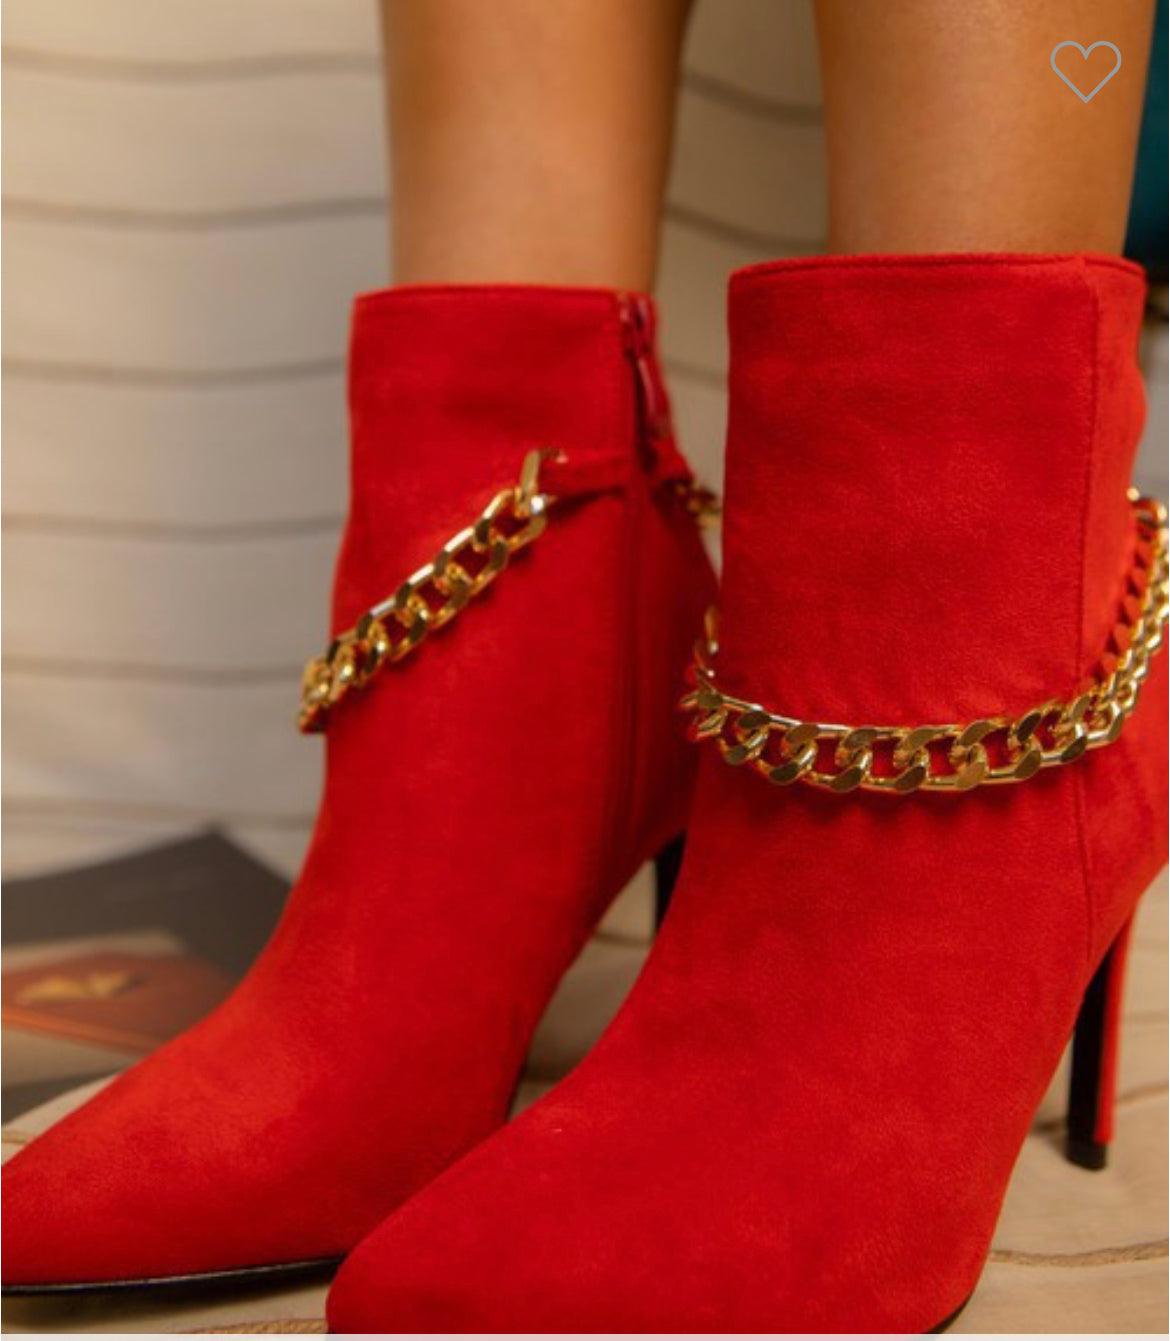 suede stiletto booties with chain - tikolighting